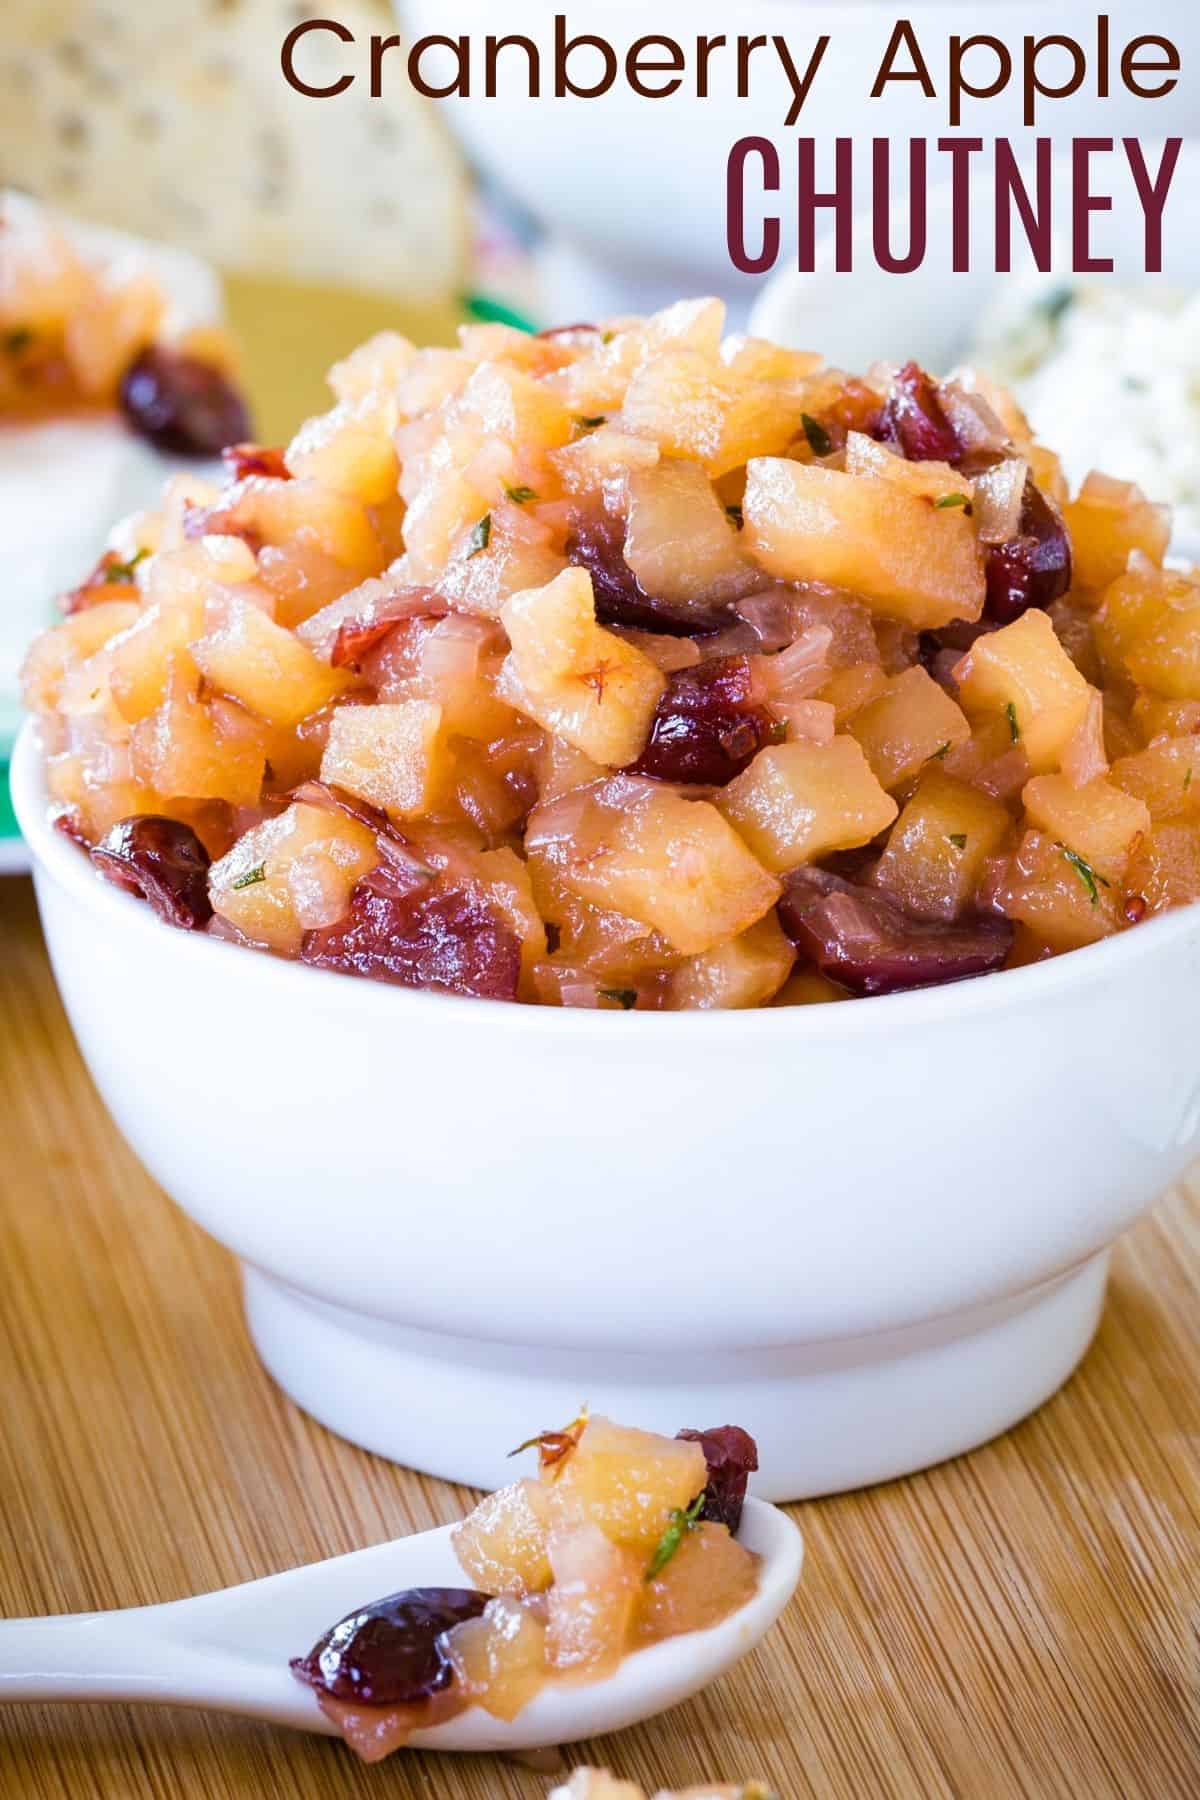 Sparkling Cider Apple Chutney - an easy recipe with four serving ideas for appetizers, or to top chicken, pork, or salads.